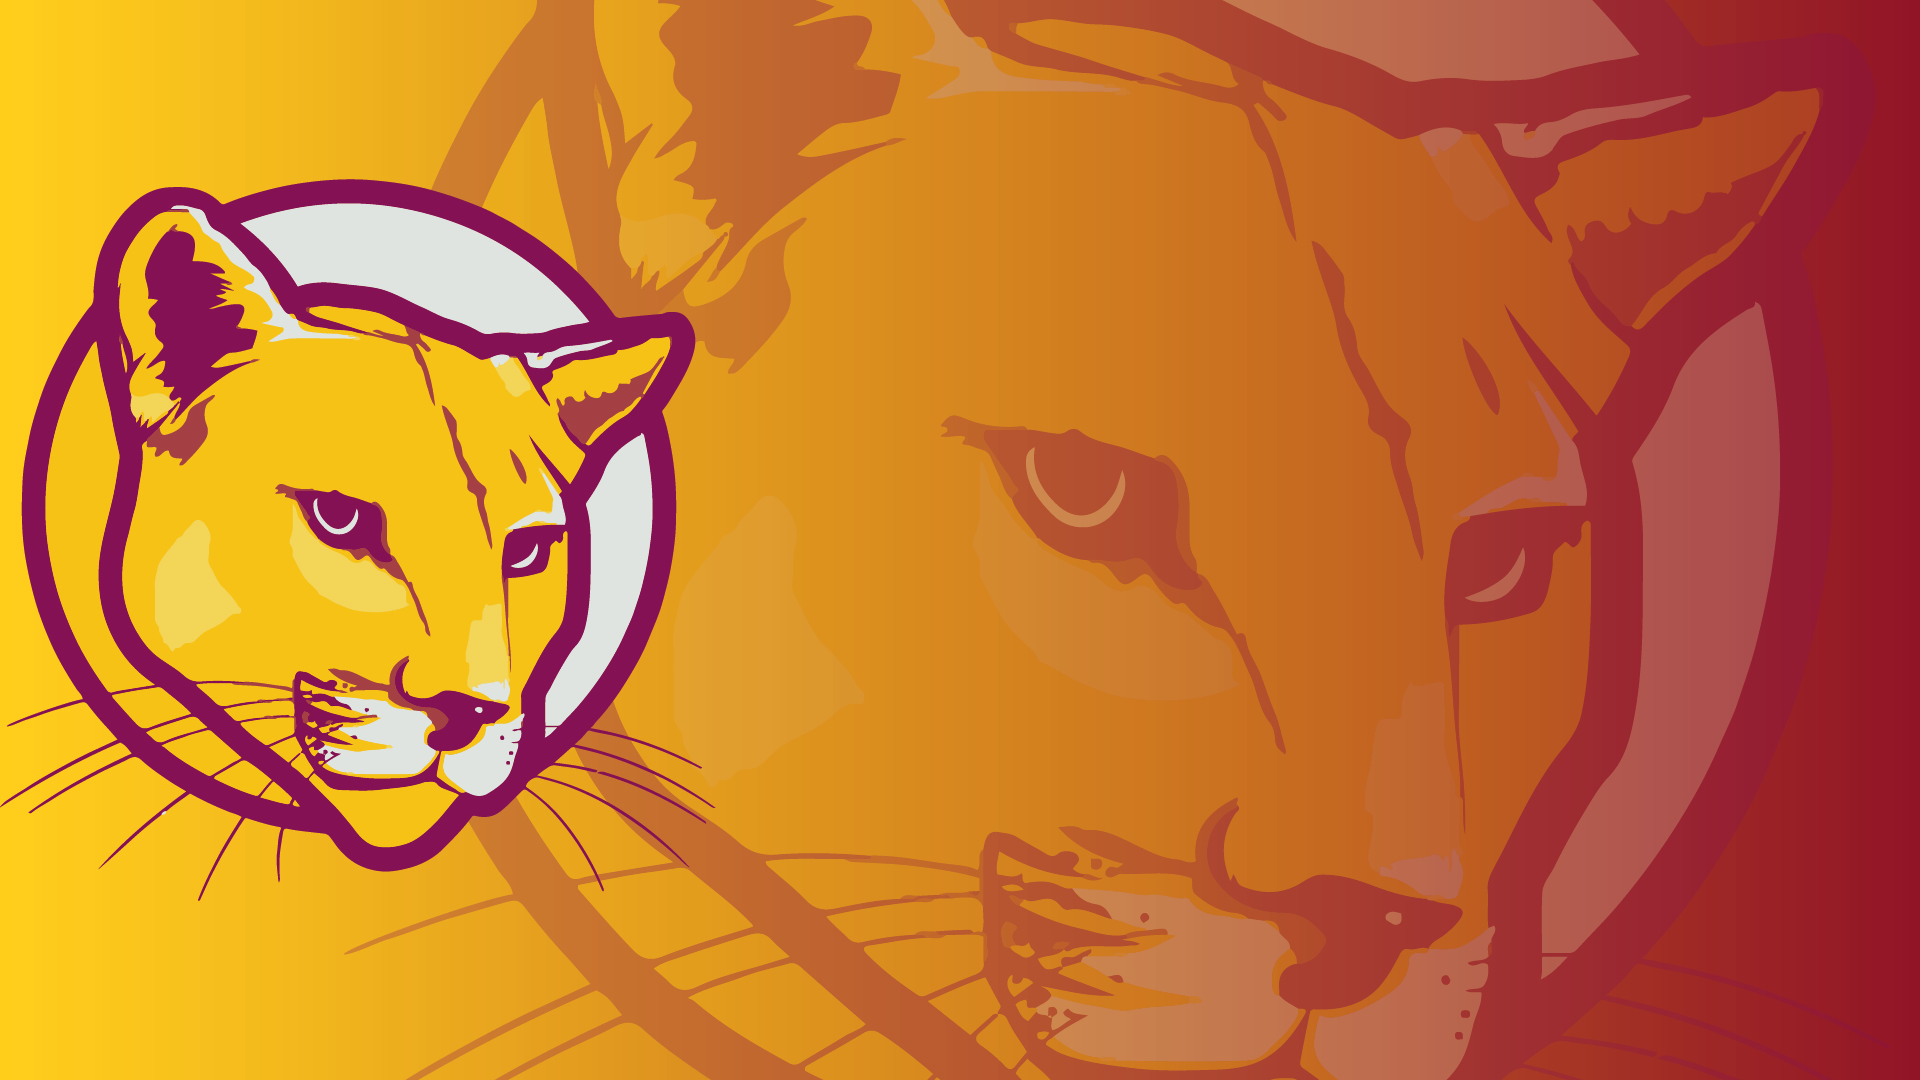 Prairie Point Panther inside of a circle logo on the left with a 50 percent visible larger copy of the logo on the right sitting over a gradient from yellow to purple.